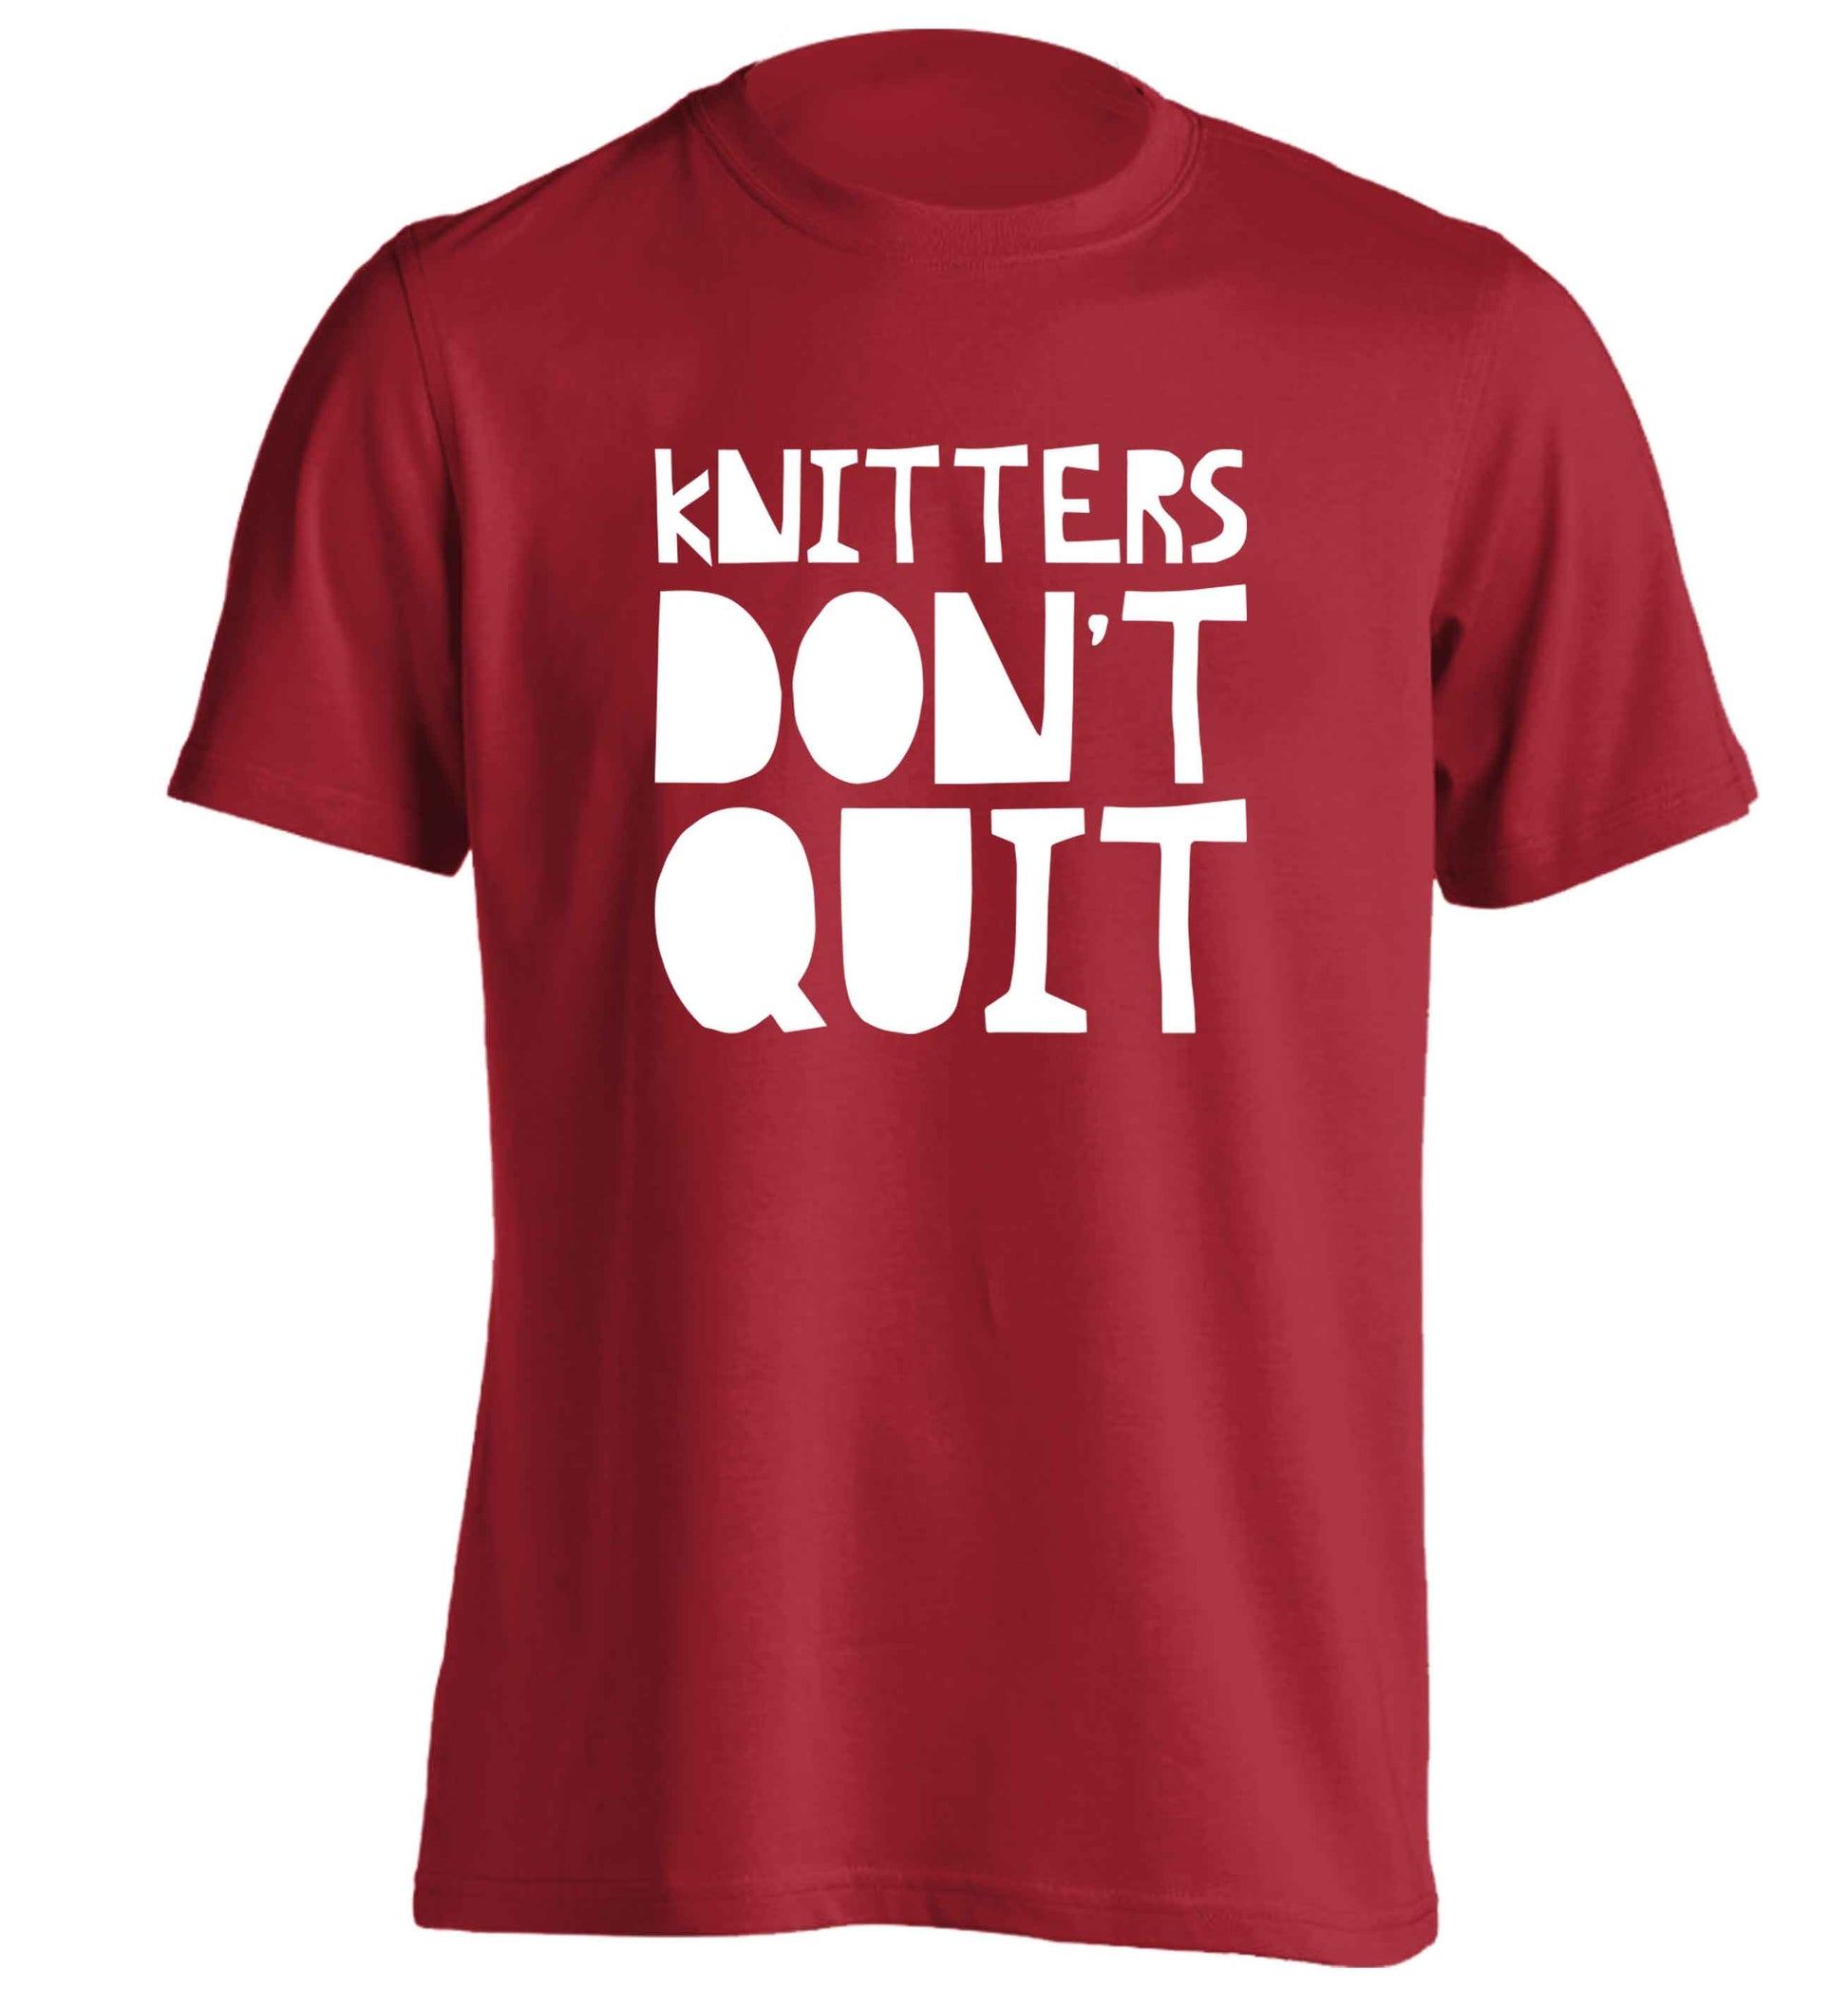 Knitters don't quit adults unisex red Tshirt 2XL